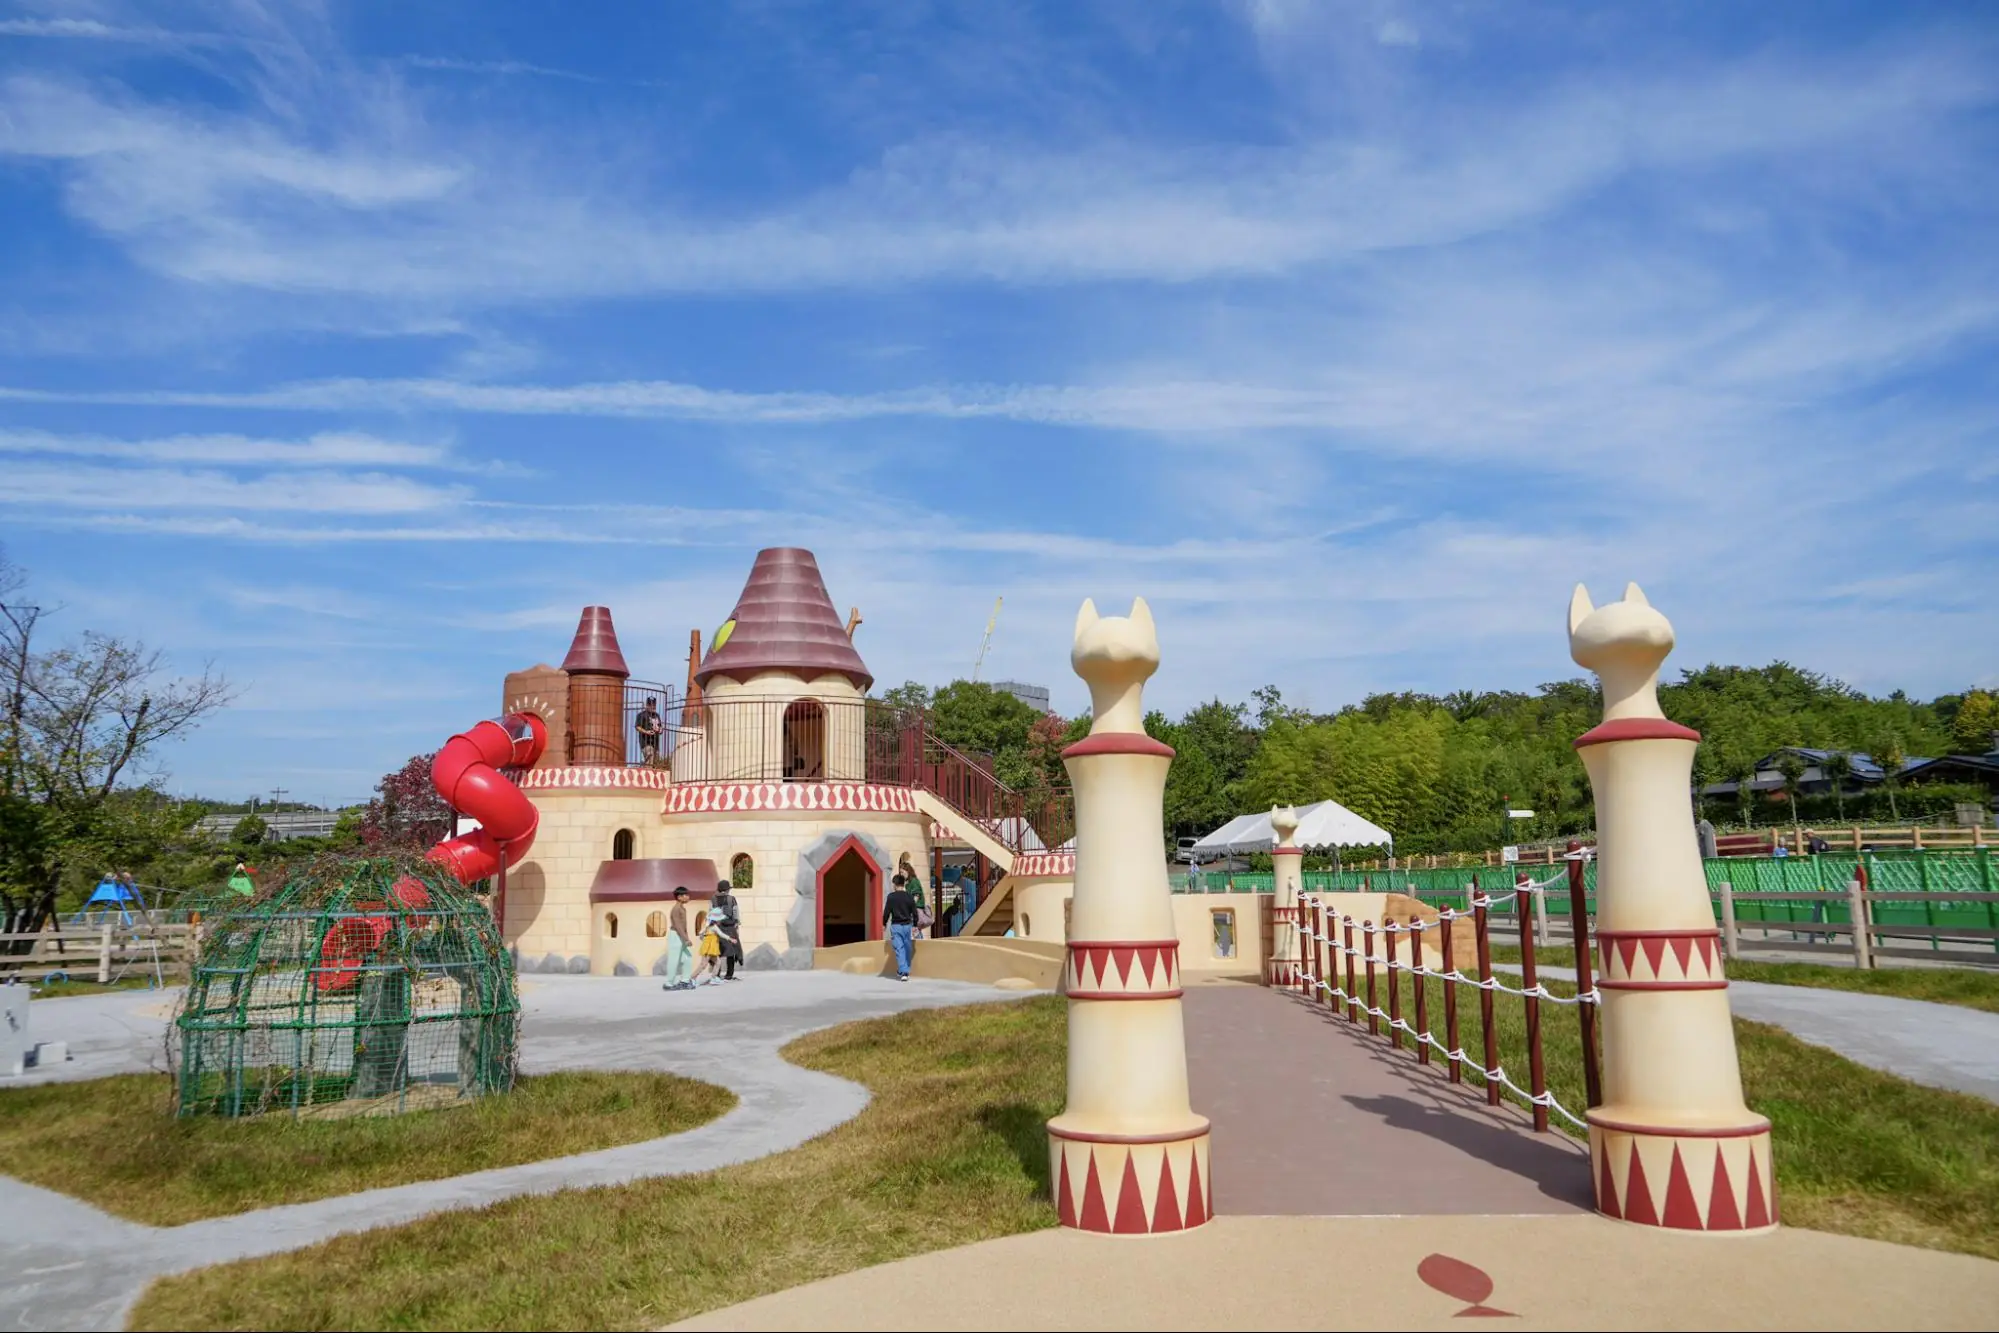 [Ghibli Park] &quot;Cat Castle Playground” with the Motif of “The Cat Returns”